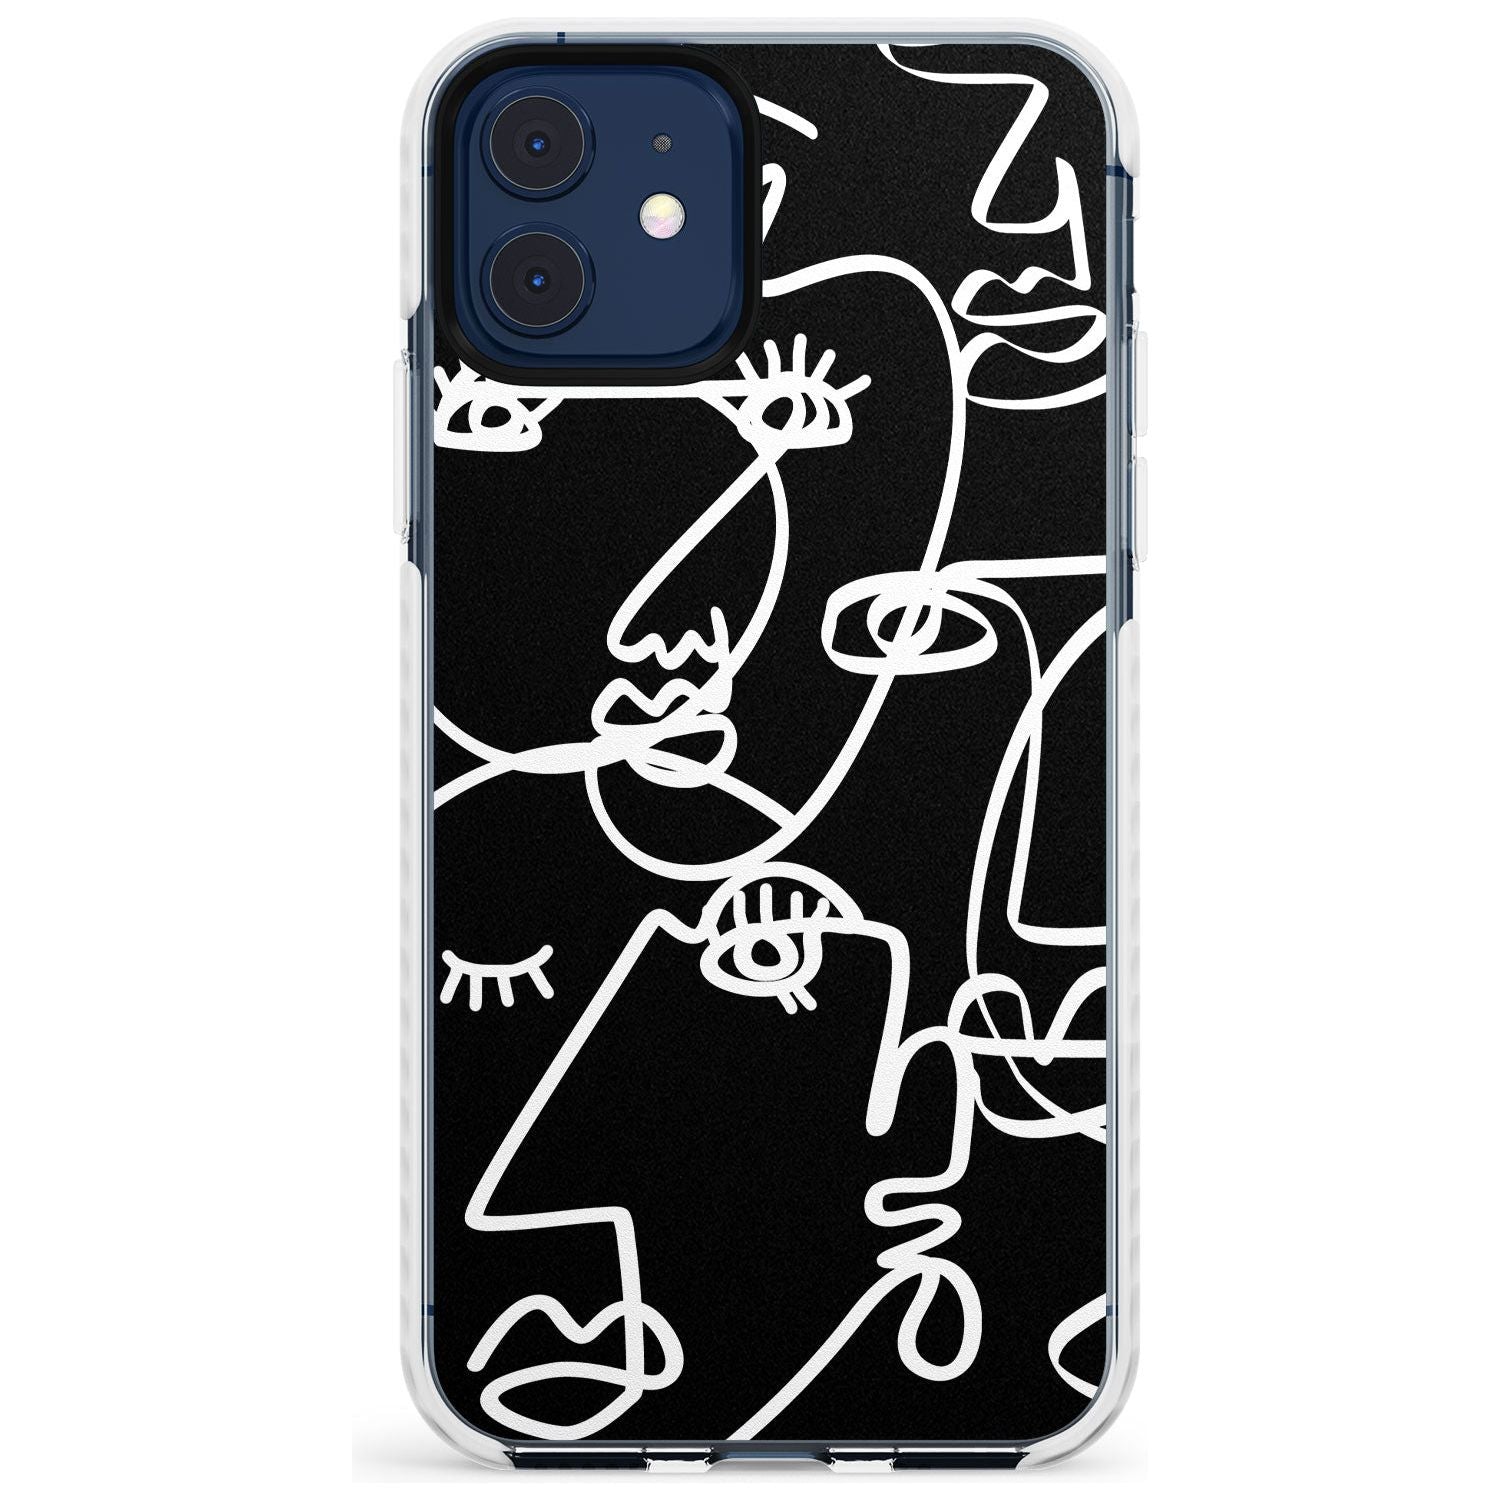 Continuous Line Faces: White on Black Slim TPU Phone Case for iPhone 11